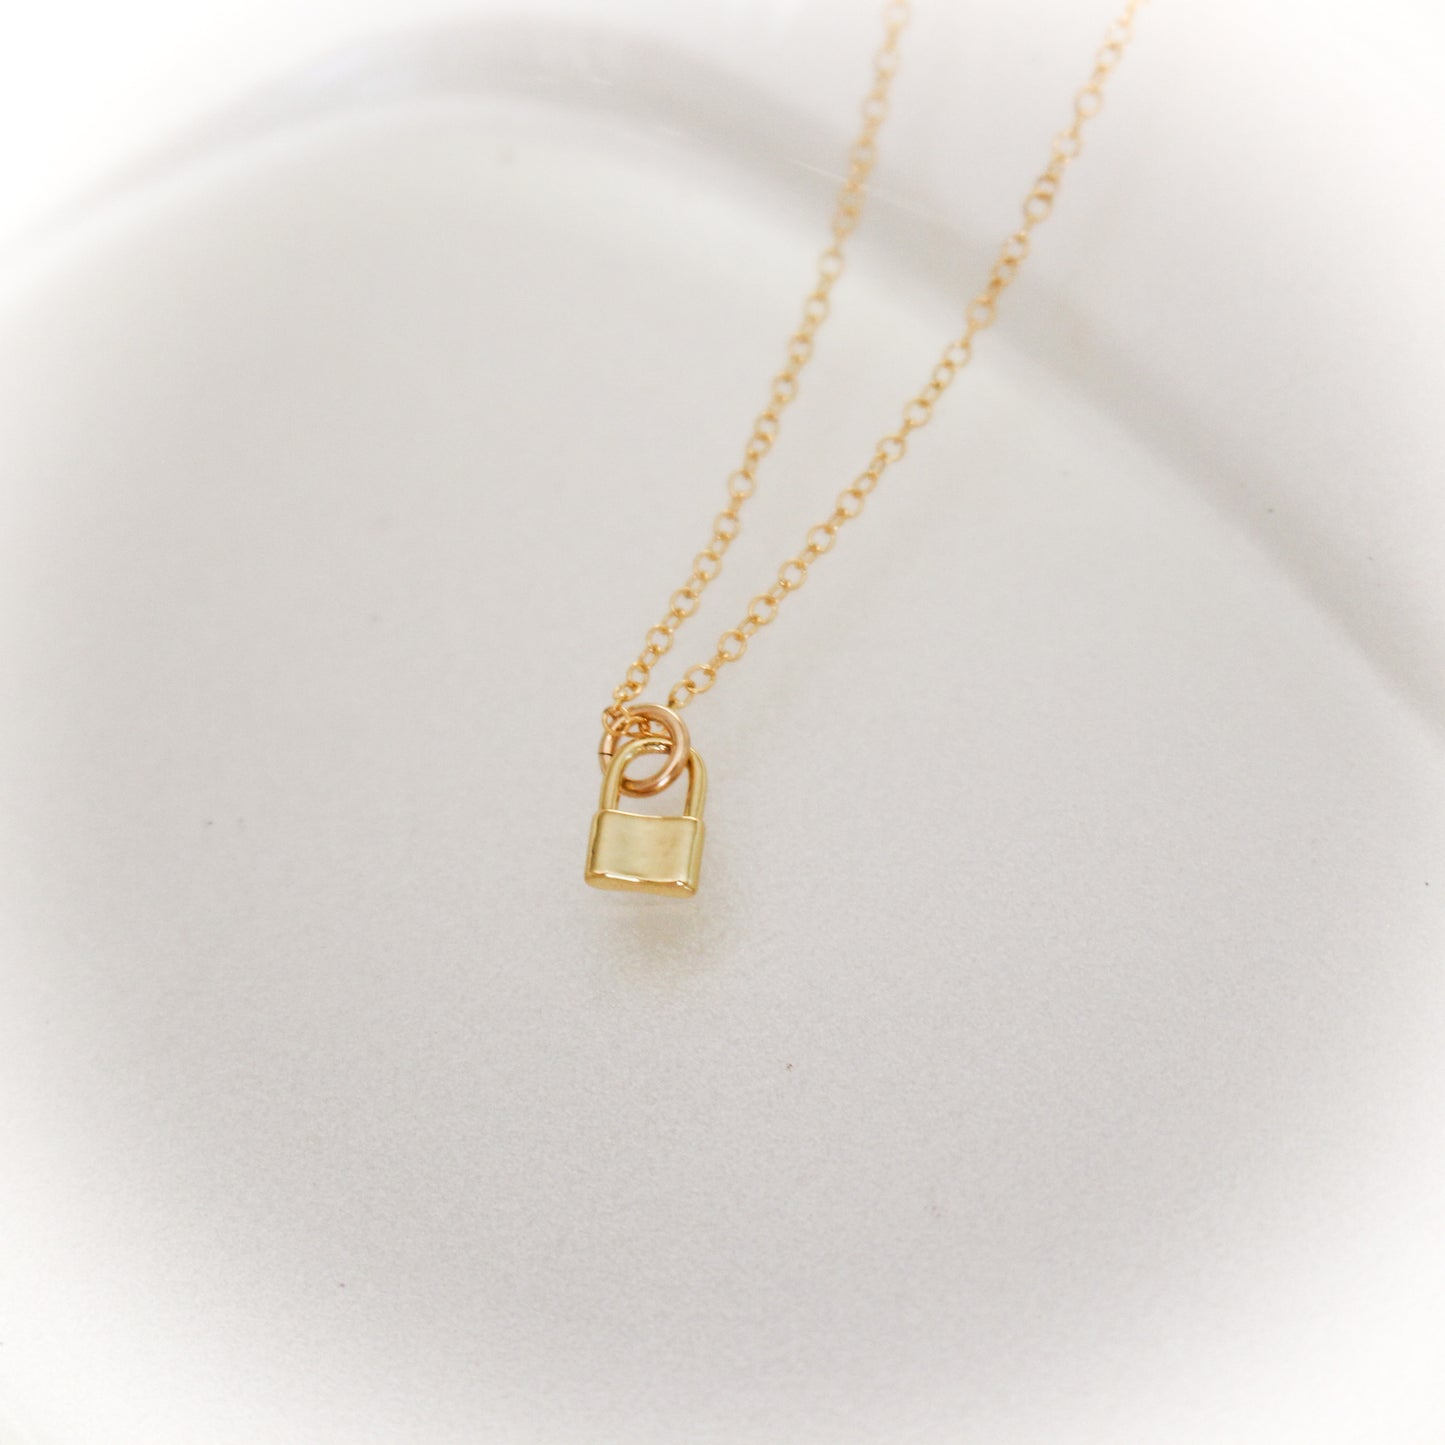 No fade Dainty minimalist padlock necklace in Gold Filled | Gold fill necklace for women | Layering pendant tiny charm